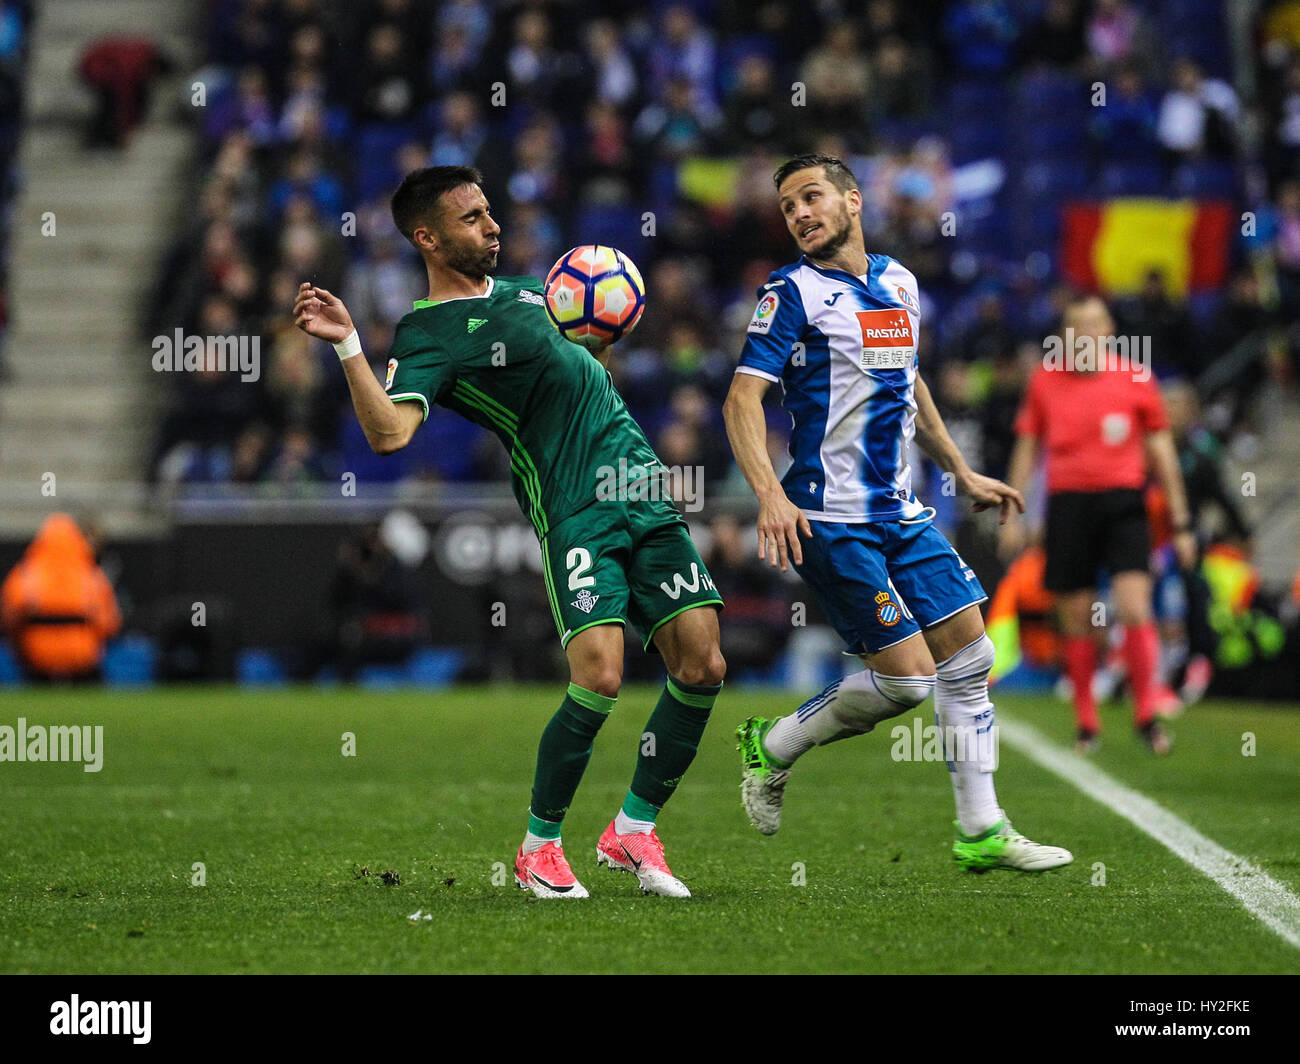 Barcelona, Spain. 31st March, 2017. Piatti and Rafa N during the second half. Barcelona, march 31, 2017. La Liga Santander match day 29 game between Espanyol de Barcelona and Real Betis de Sevilla played in RDCE Stadium, Barcelona, Spain. Espanyol defeated Betis with two late goals scored by Javi Fuego (87 min) and Reyes (90 min). Ruben Castro scored for Betis (78 min). Photo by Pedro Salado | PHOTO MEDIA EXPRESS Credit: VWPics/Alamy Live News Stock Photo